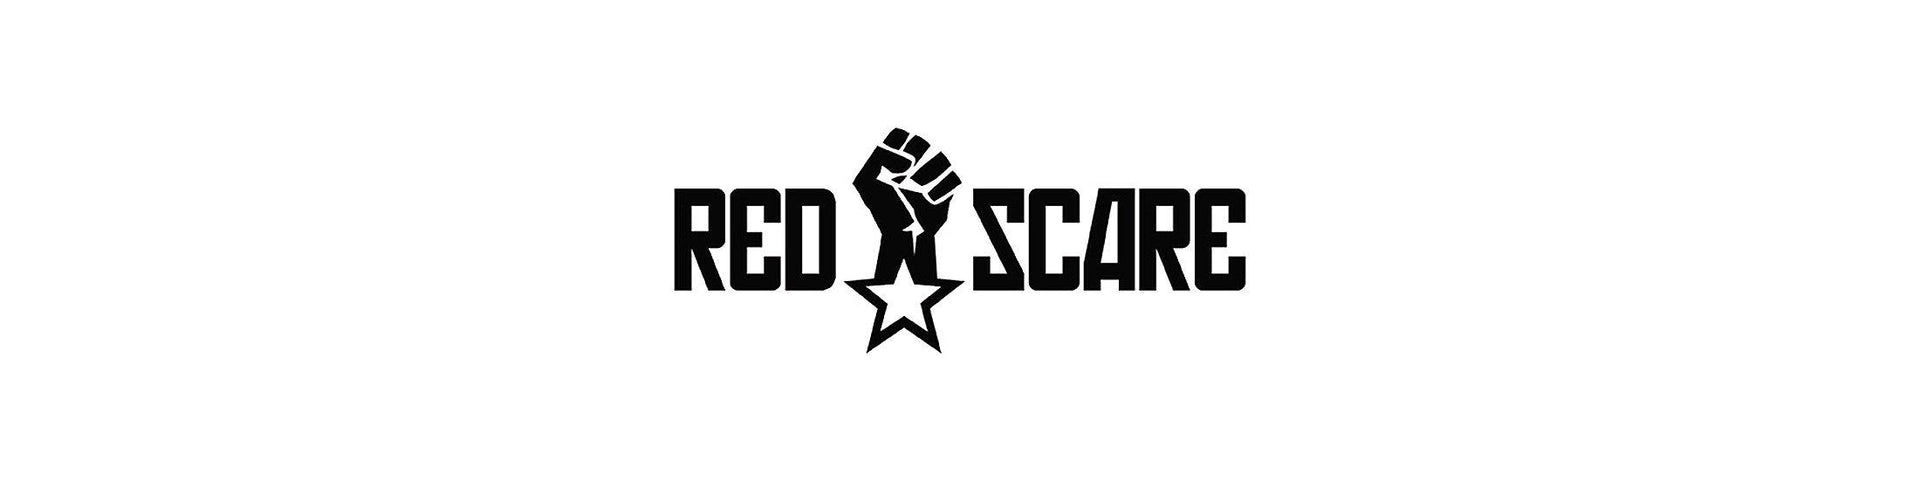 Shop – Red Scare Records – Band & Music Merch – Cold Cuts Merch